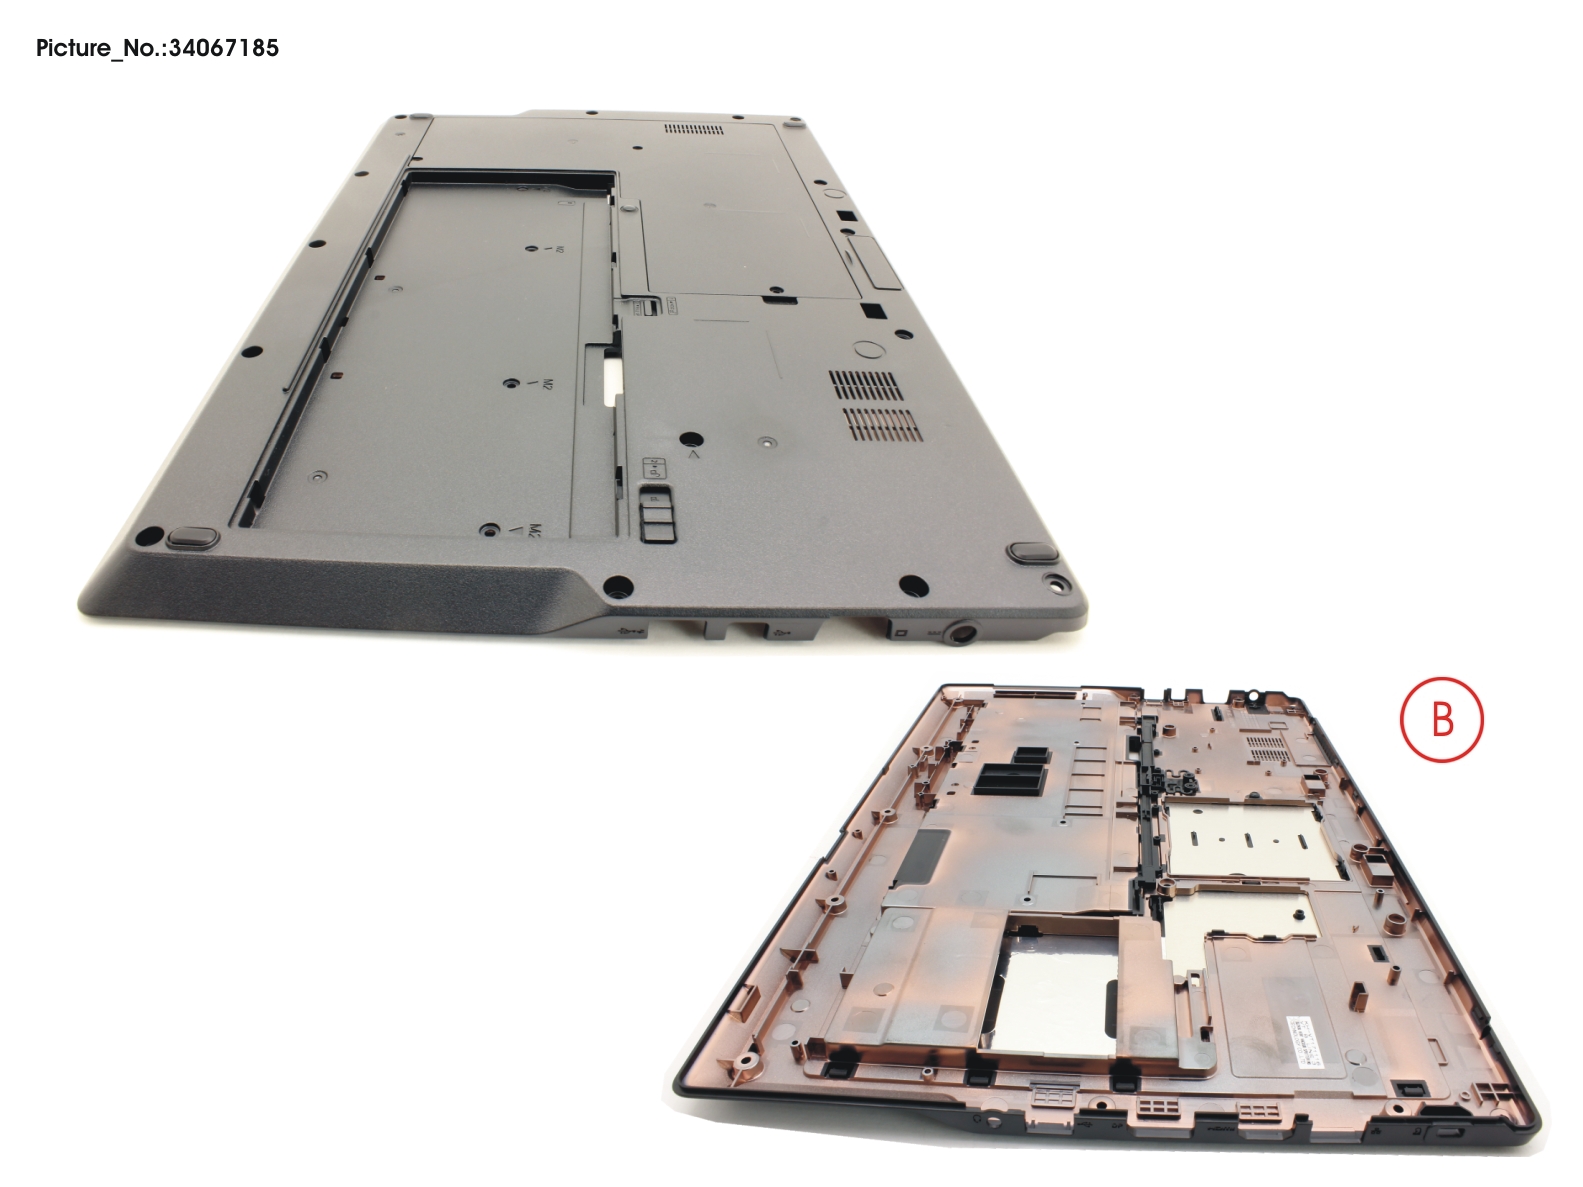 LOWER ASSY (FOR SSD M.2 MOD.)